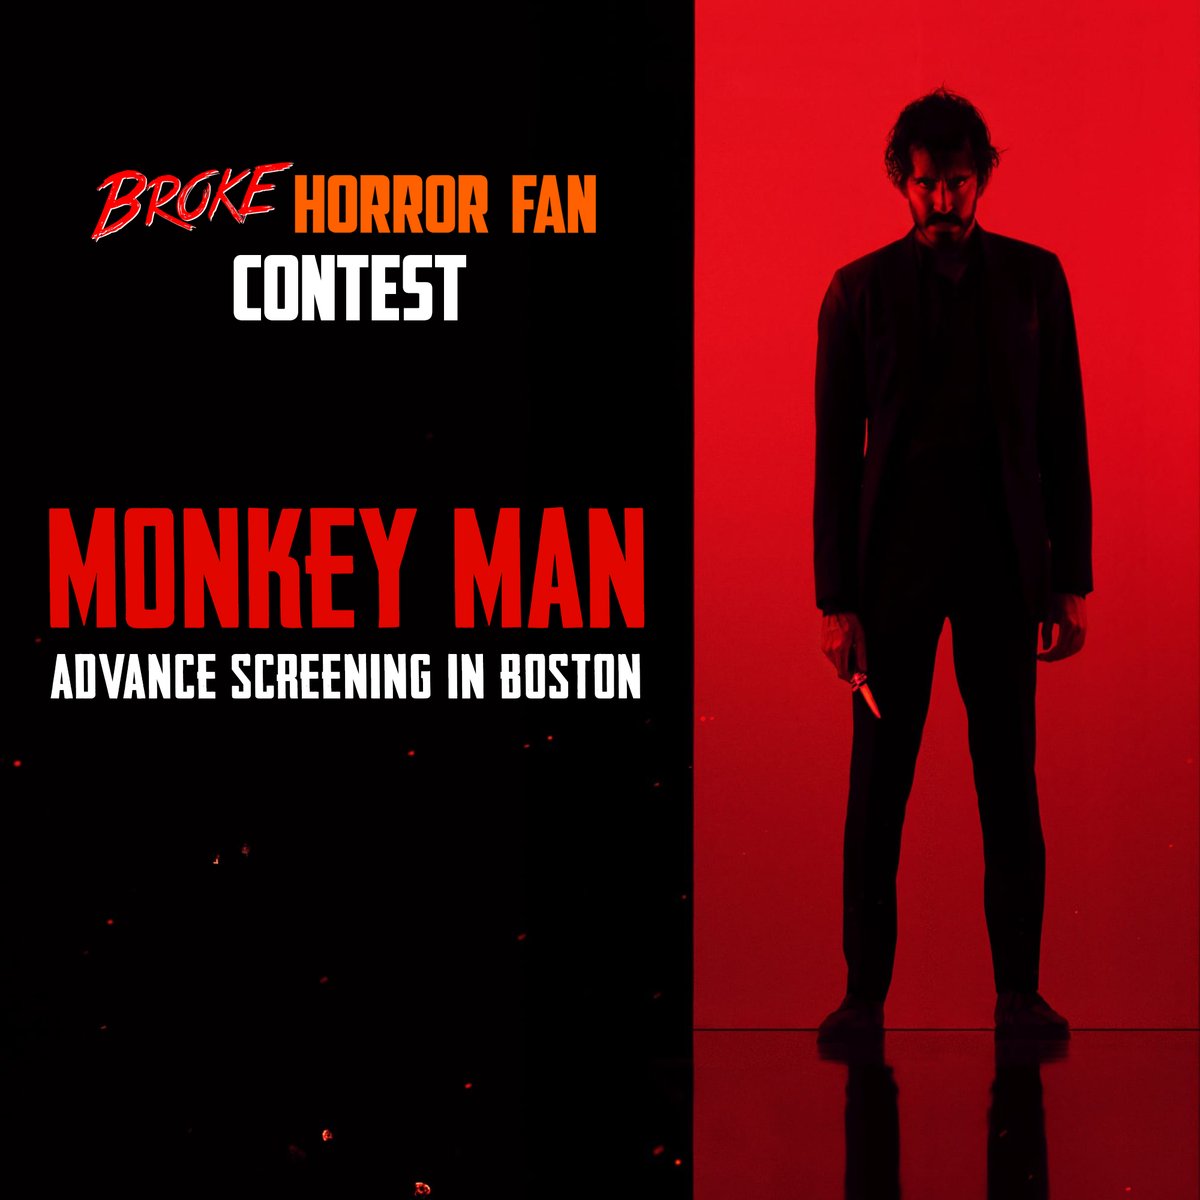 BOSTON! Want to see Dev Patel's @monkeymanmovie early and for free? 2 followers who RT this will each win a pair of tickets to an advance screening this Wednesday night. Details: brokehorrorfan.com/post/746568792…